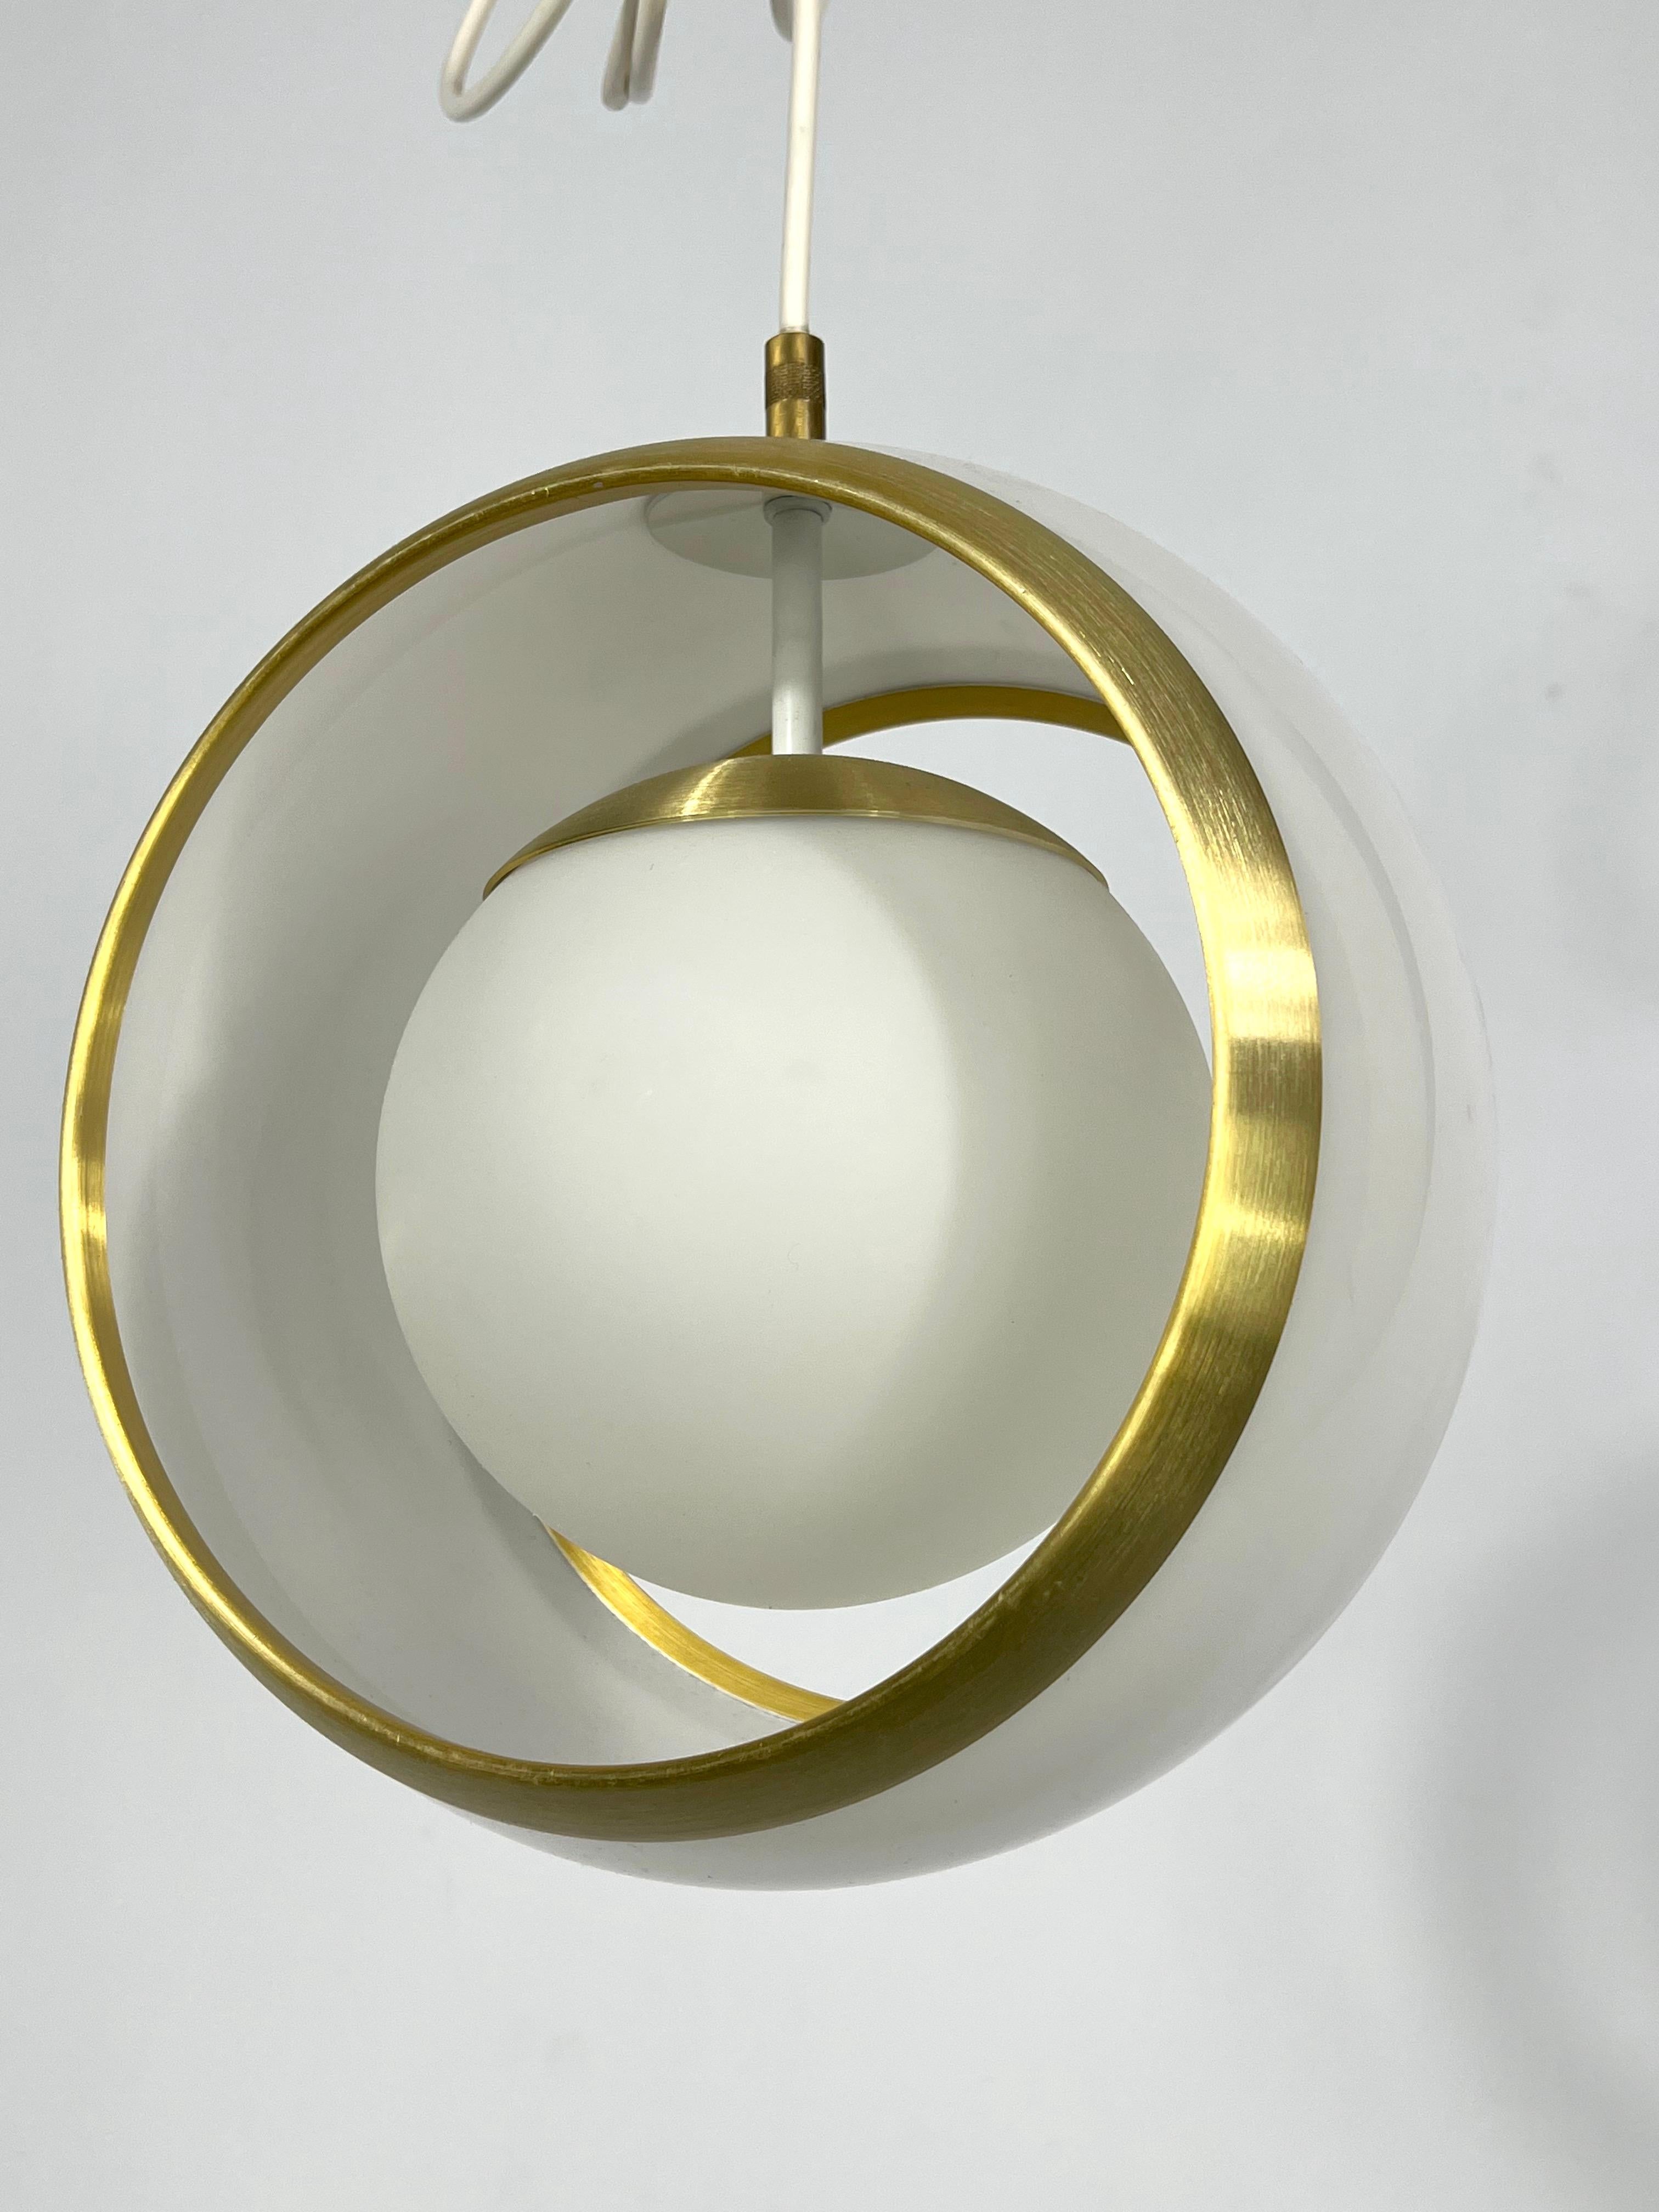 Stilux Milano, Gilded Aluminum, Opaline and Perspex Pendant, Italy, 1960s For Sale 3